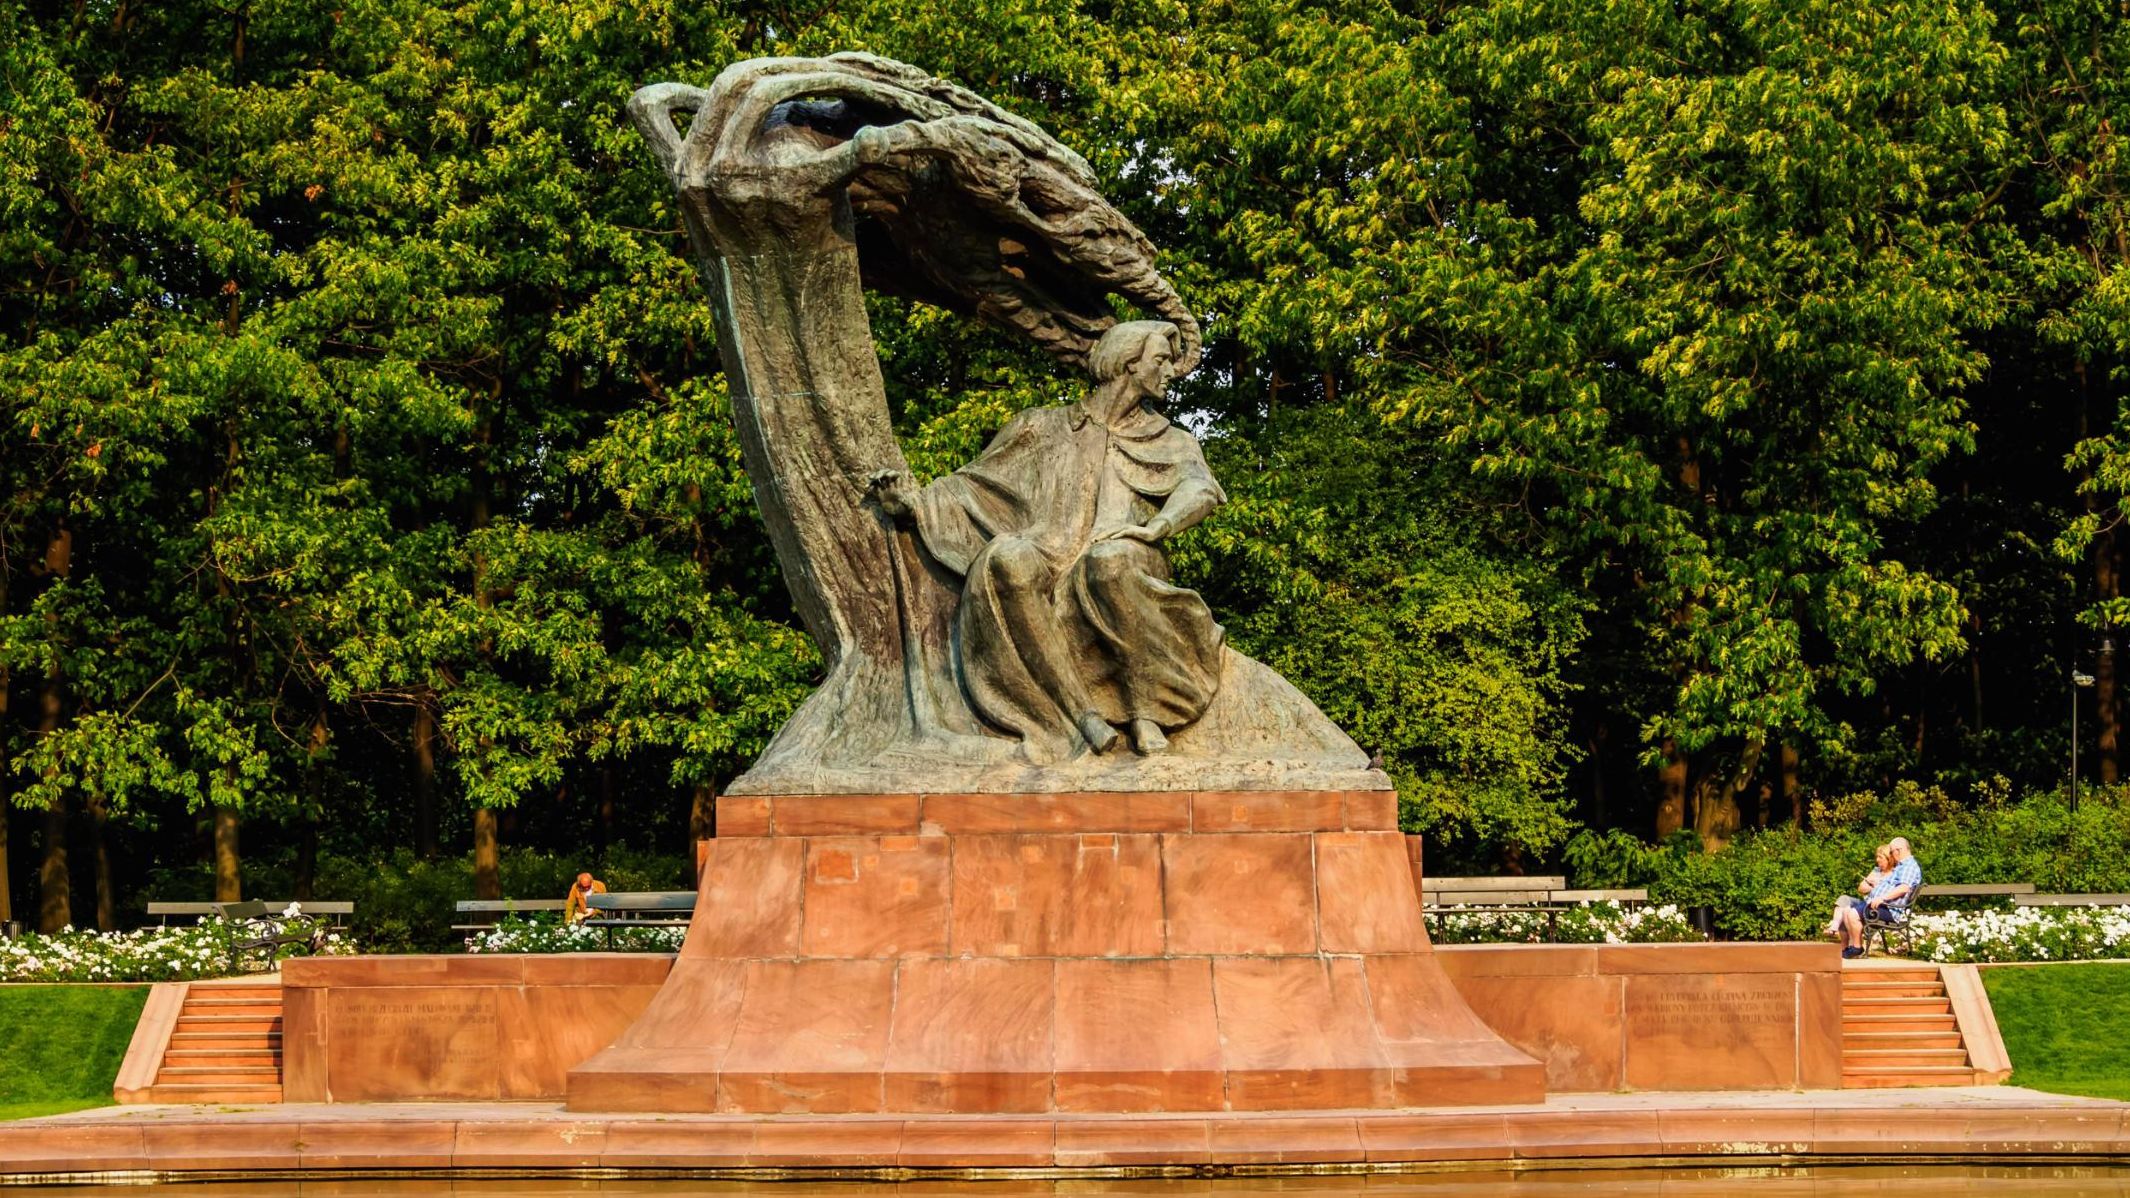 A statue of Chopin in the Royal Baths Park, Warsaw.